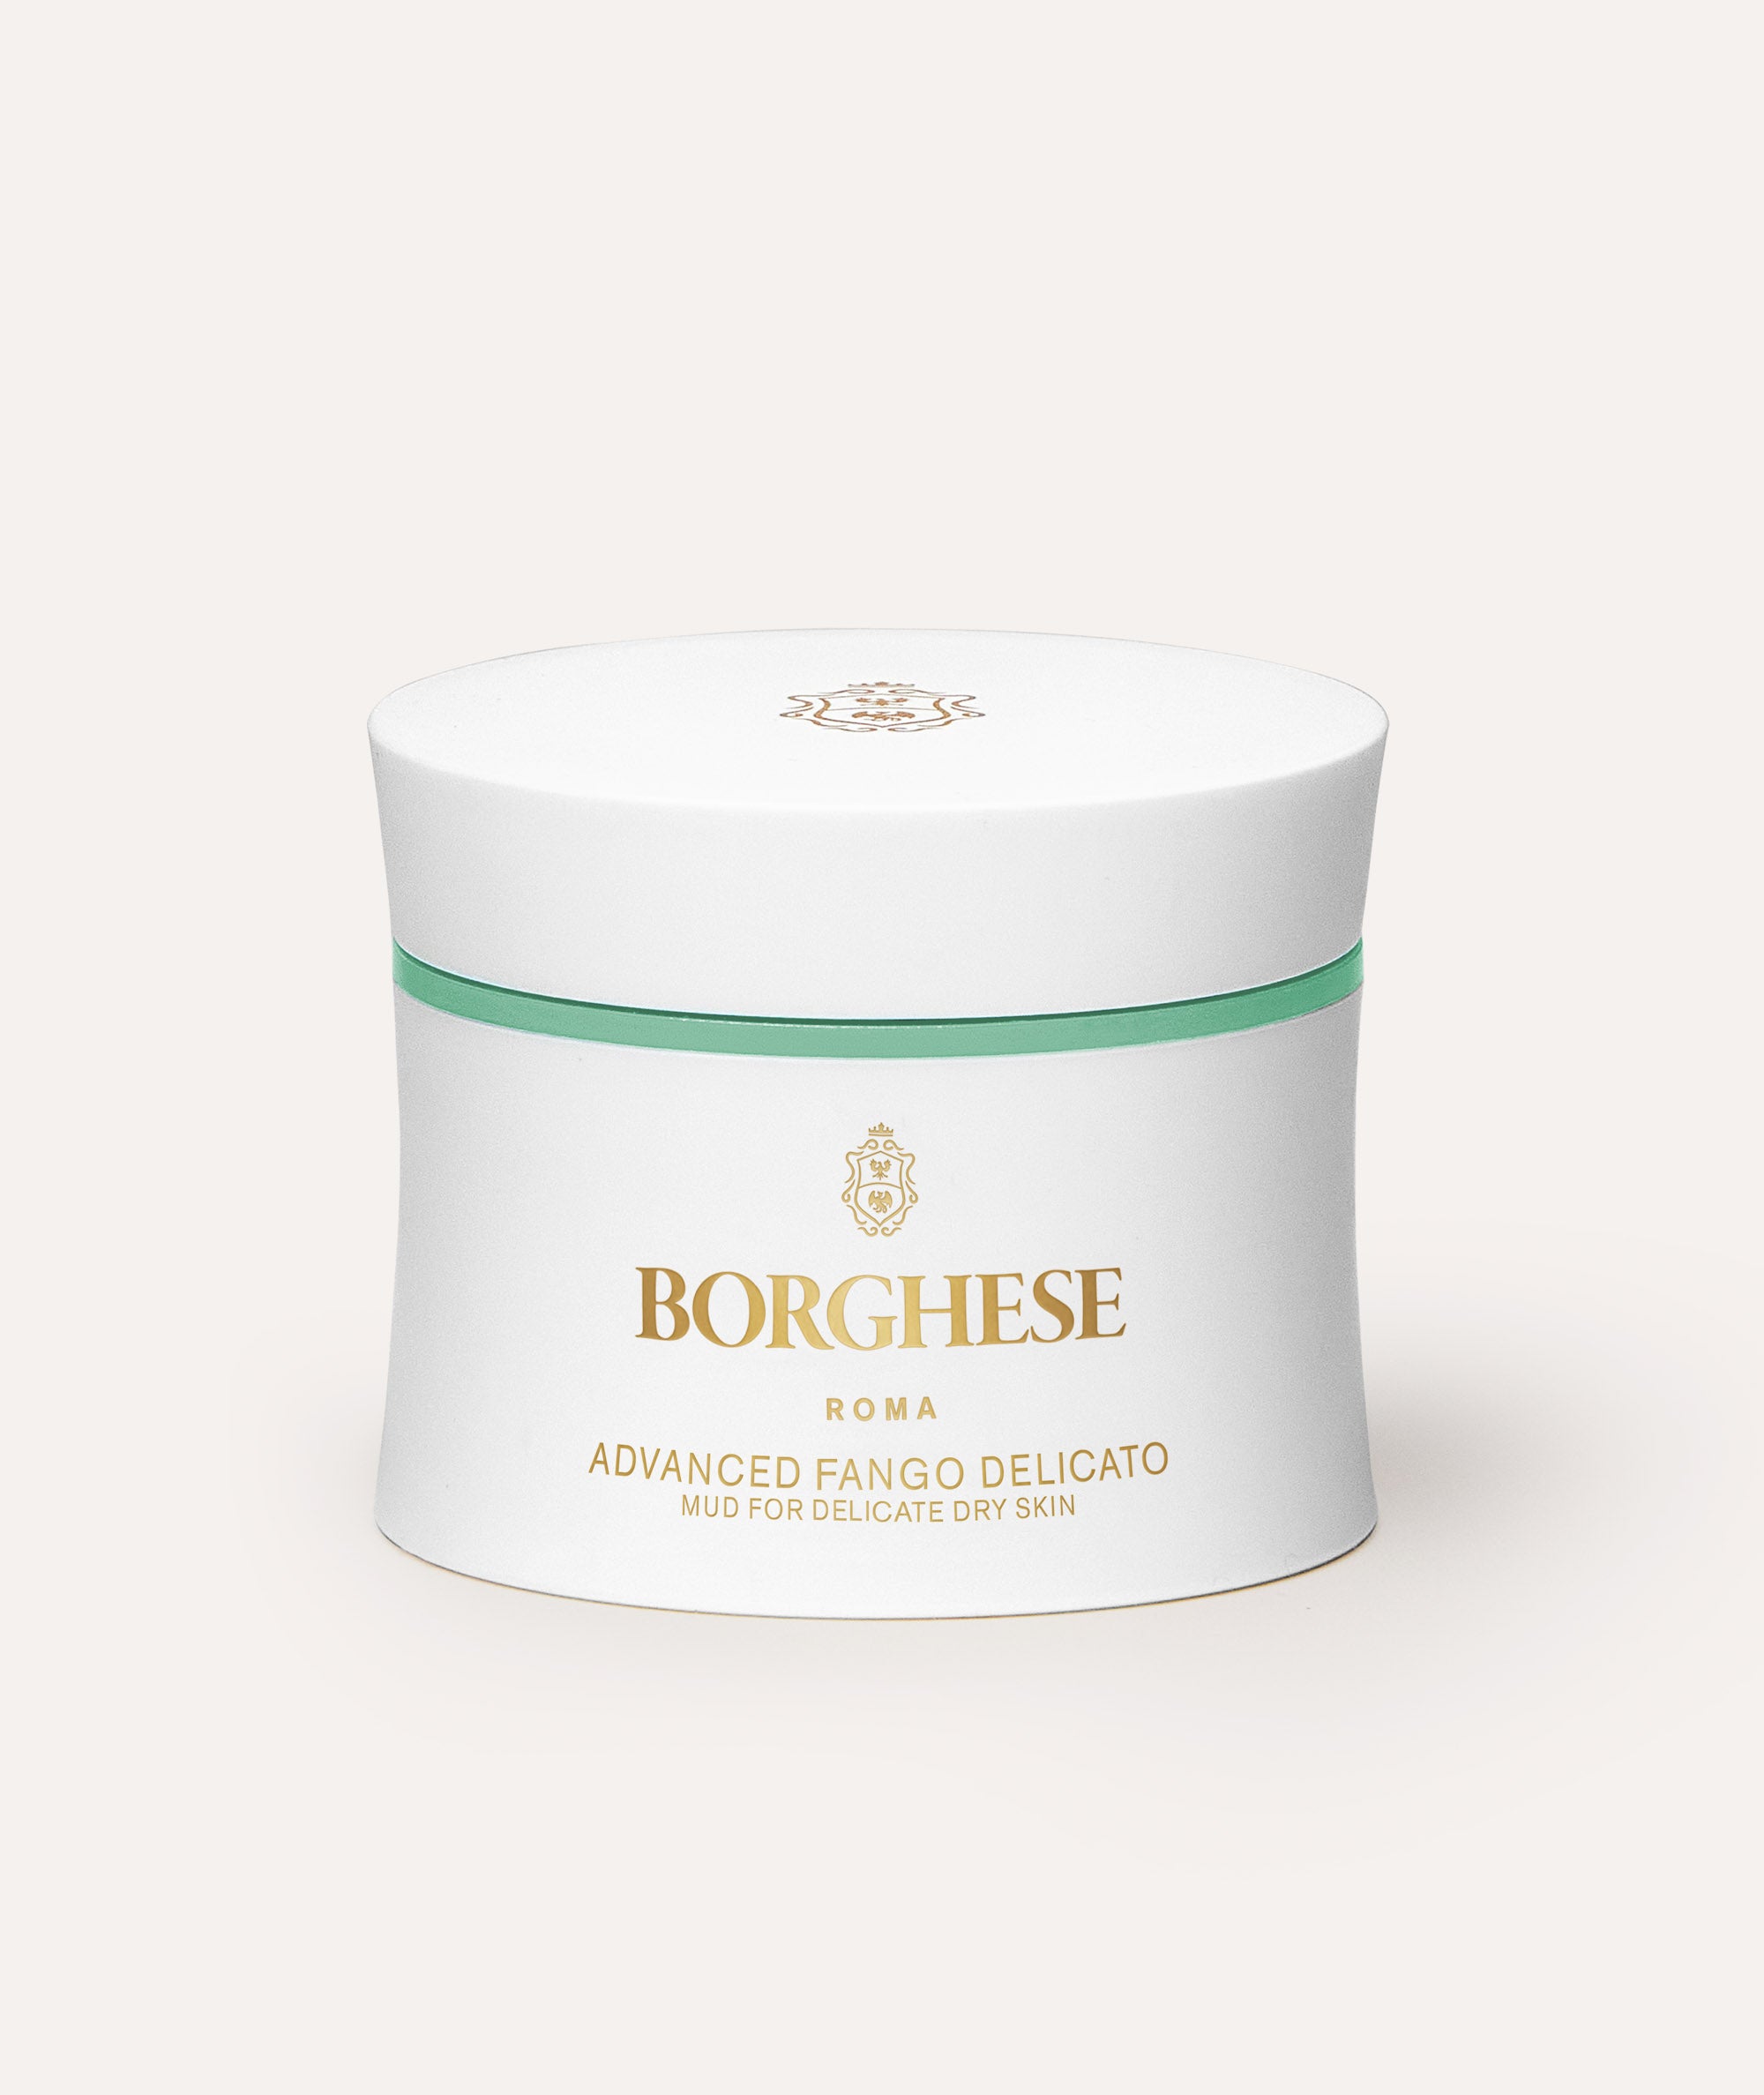 This is a picture of the Borghese Advanced Fango Delicato Mud Mask in a white jar.